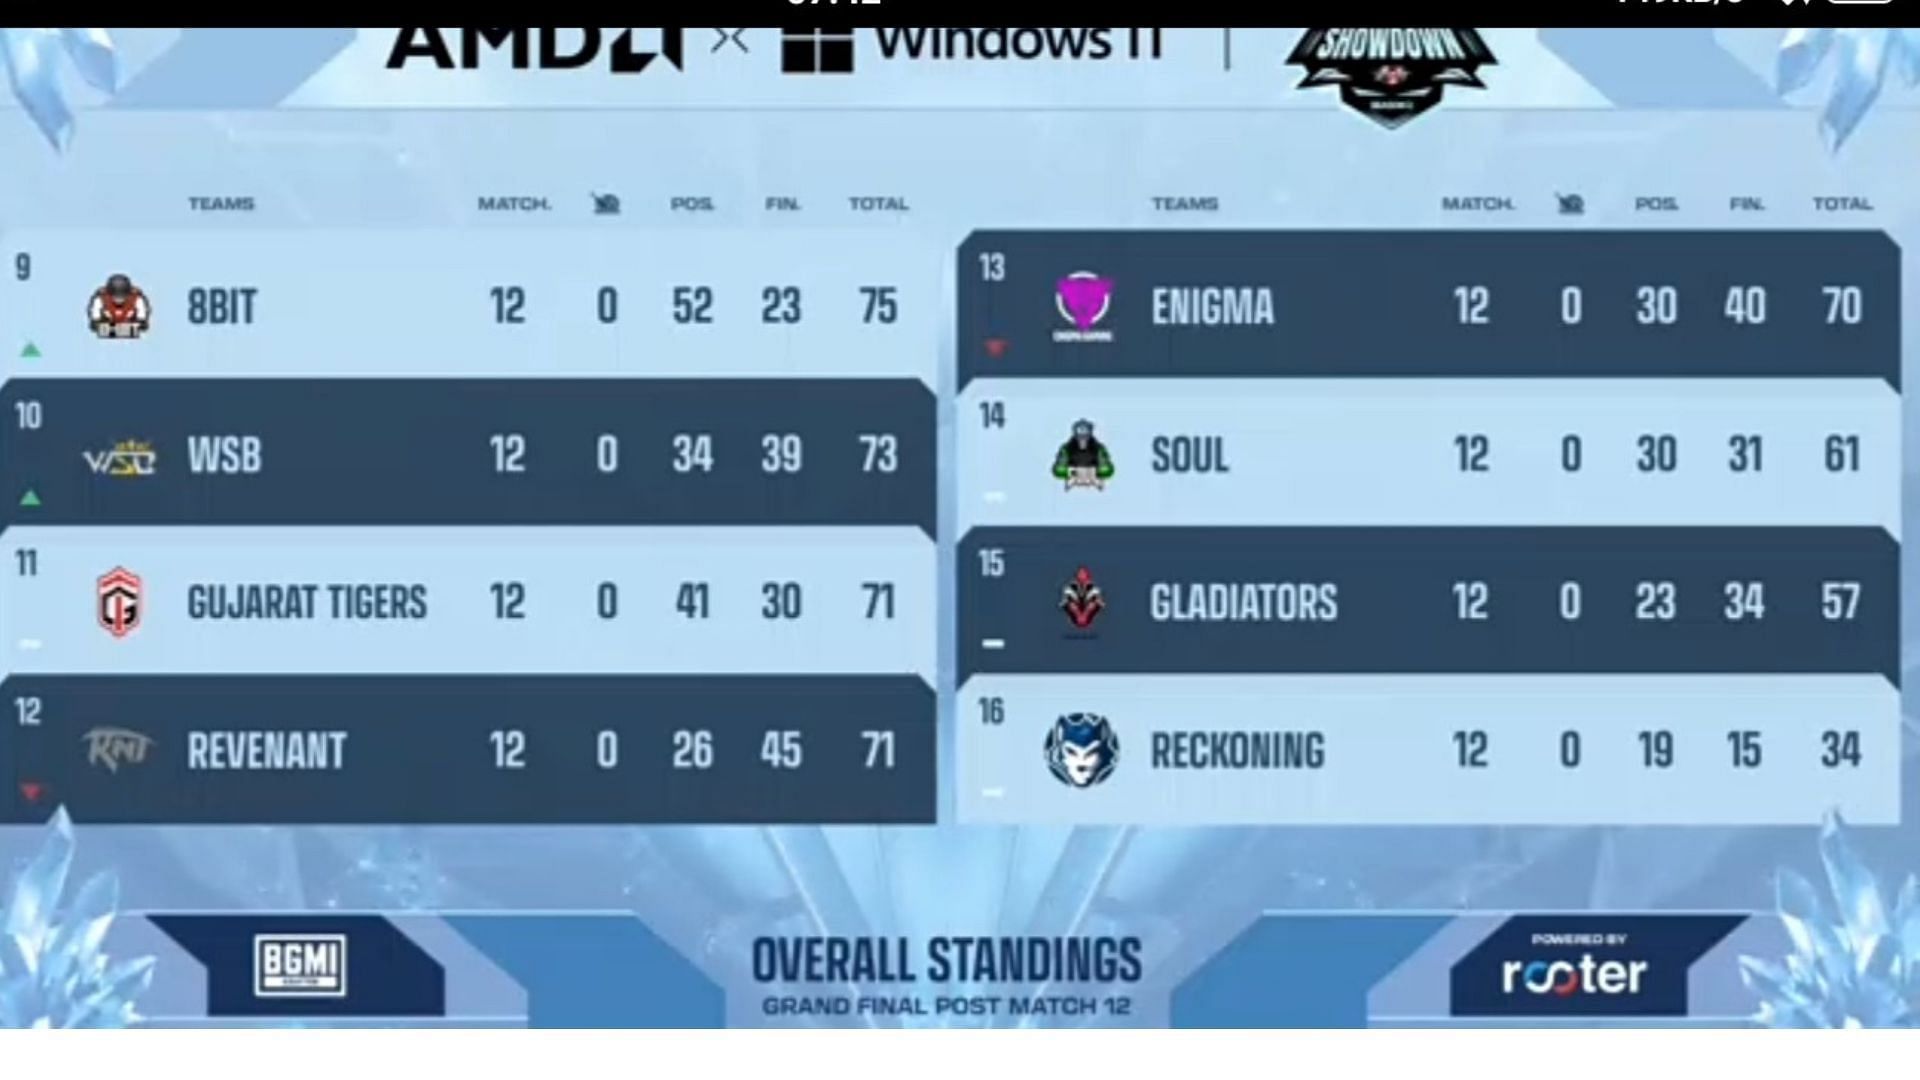 Overall standings of BGIS Showdown Finals after 12 matches (Image via Upthrust)